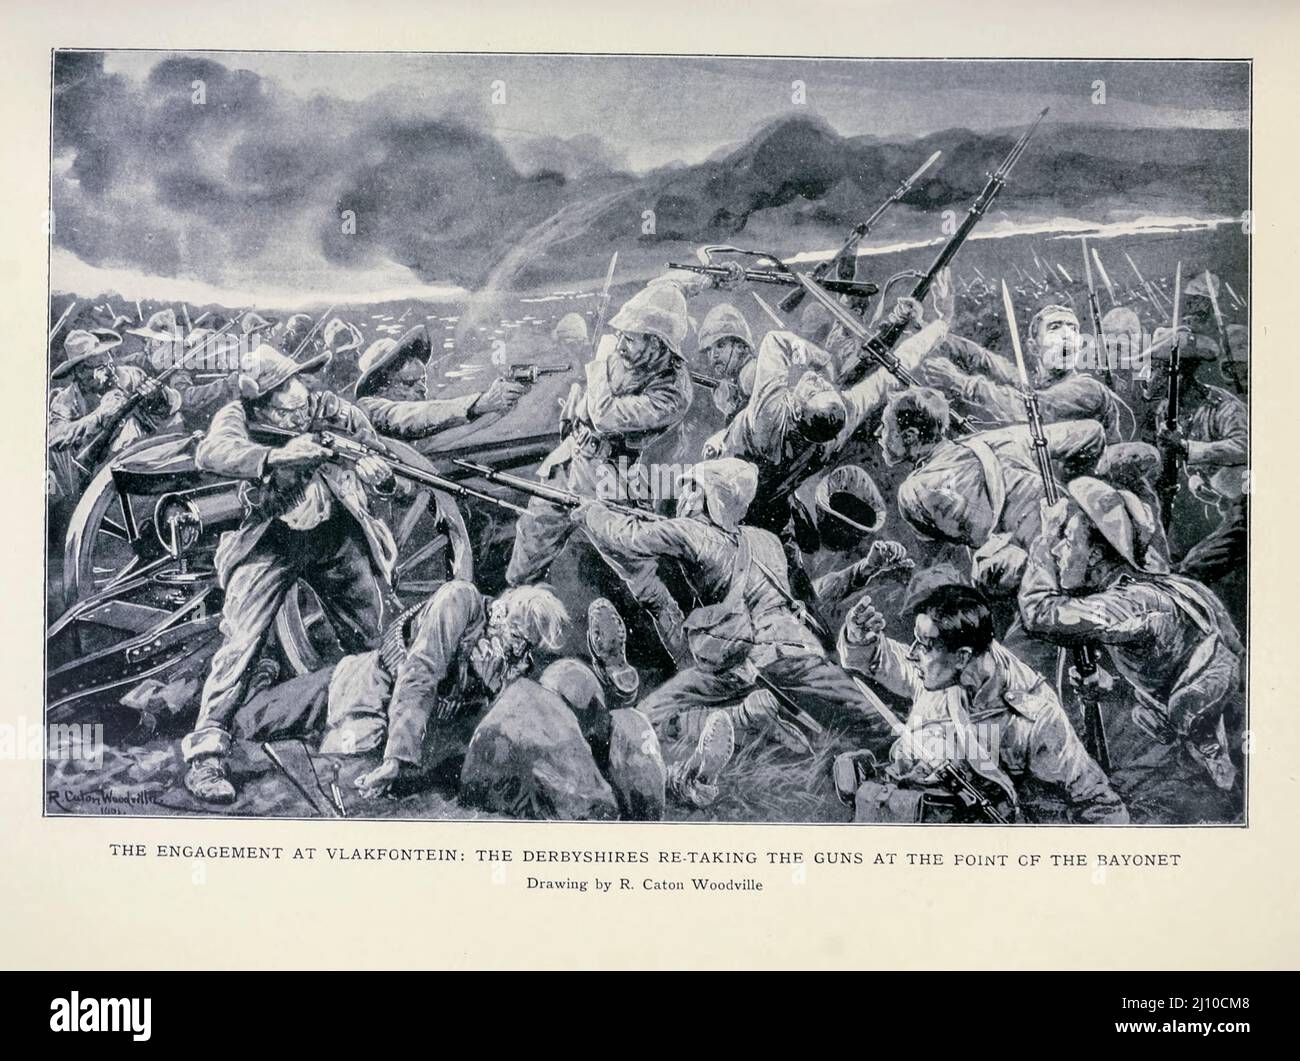 The Engagement at Vlakfontein, The Derbyshires re-take the Guns at the Point if the Bayonet Drawing by R. Caton Woodville from the book ' South Africa and the Transvaal war ' by Louis Creswicke, Publisher; Edinburgh : T. C. & E. C. Jack 1900 Stock Photo